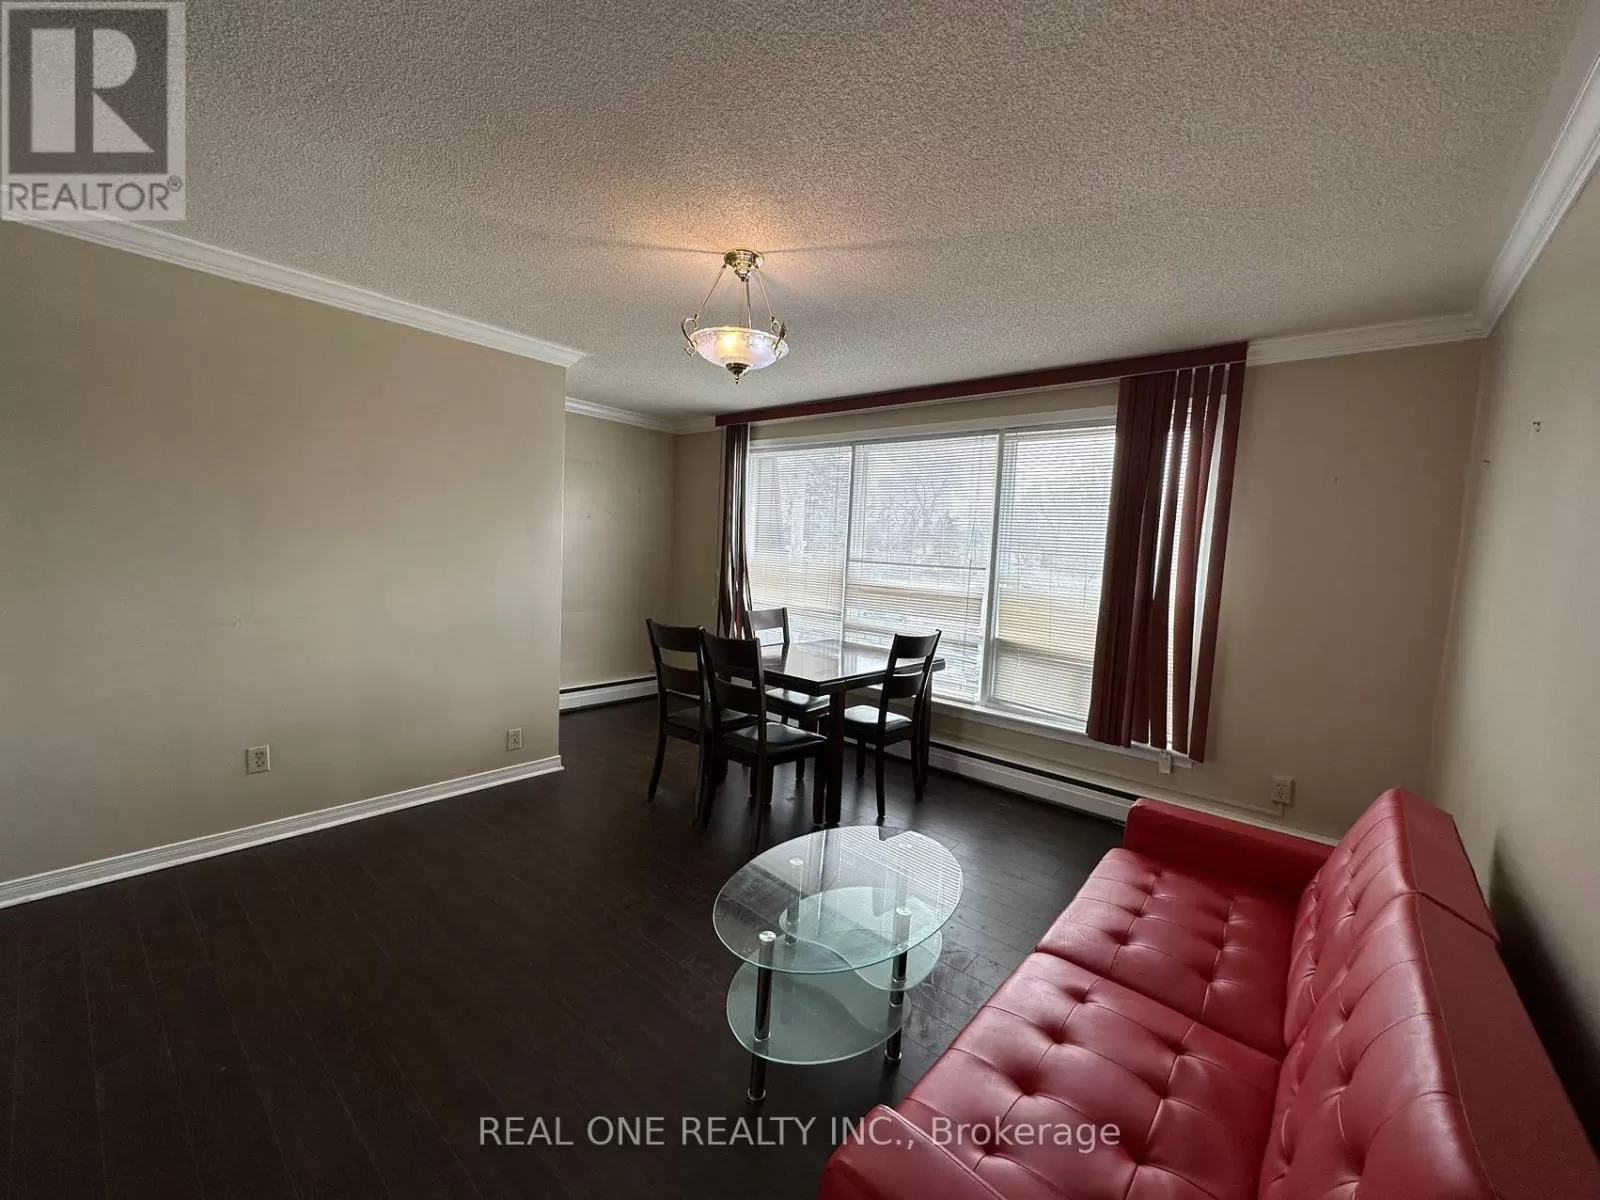 Other for rent: W - 297 Old Kingston Road, Toronto, Ontario M1C 1B4